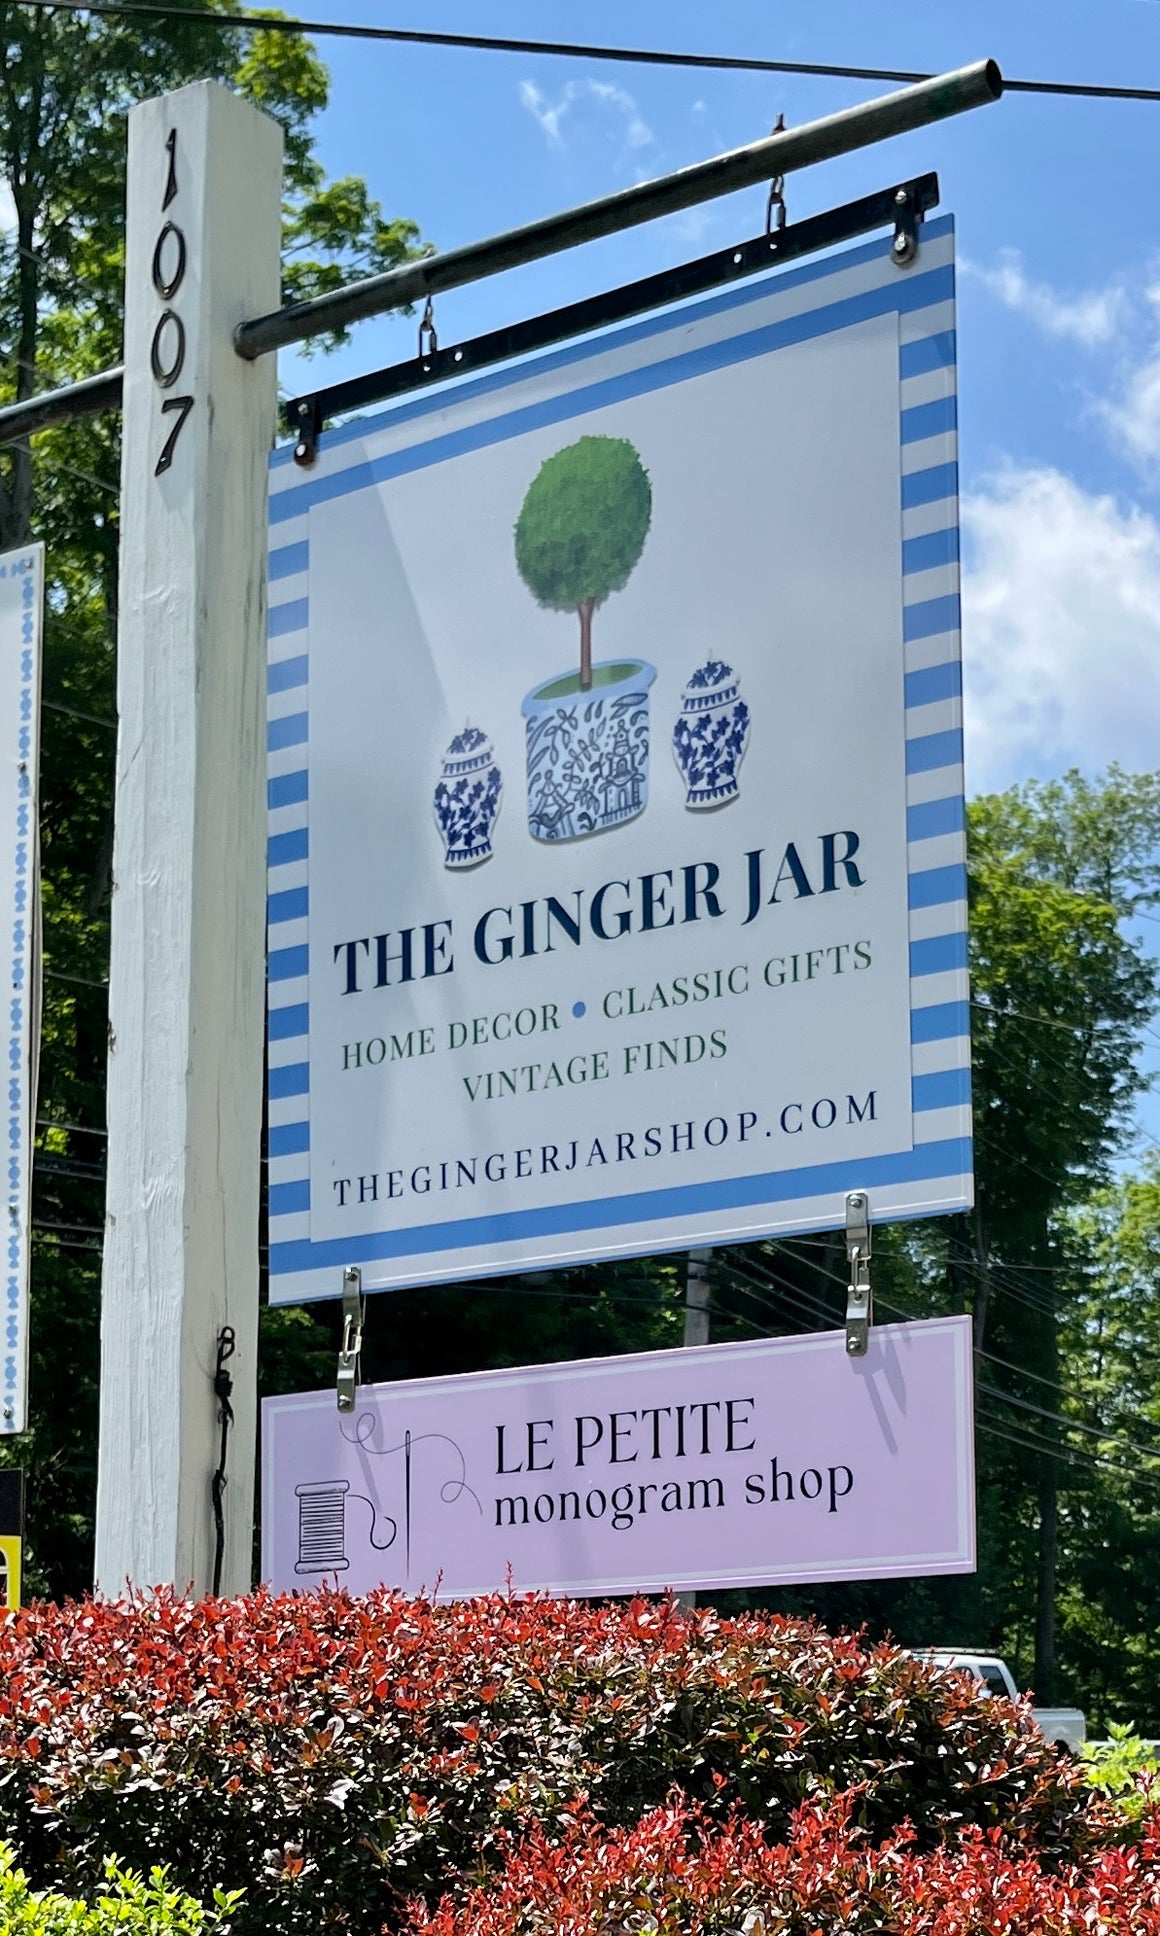 DISCOVER THE GINGER JAR IN HARDING, NEW JERSEY ON ROUTE 202/ THE OLD COUNTRY MILE